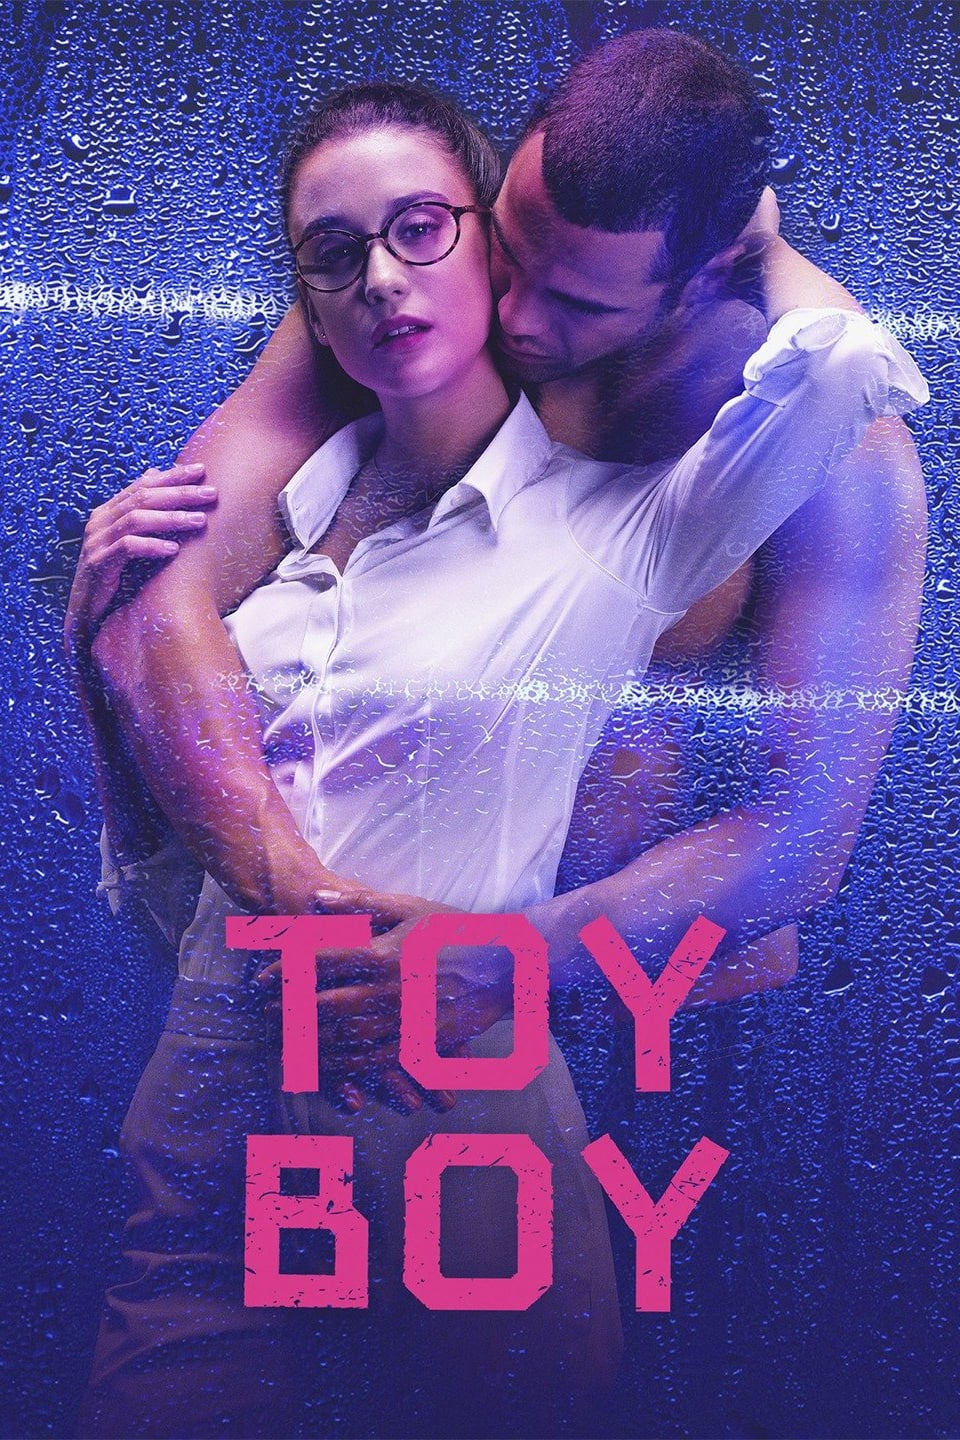 Toy Boy TV Shows About Trip